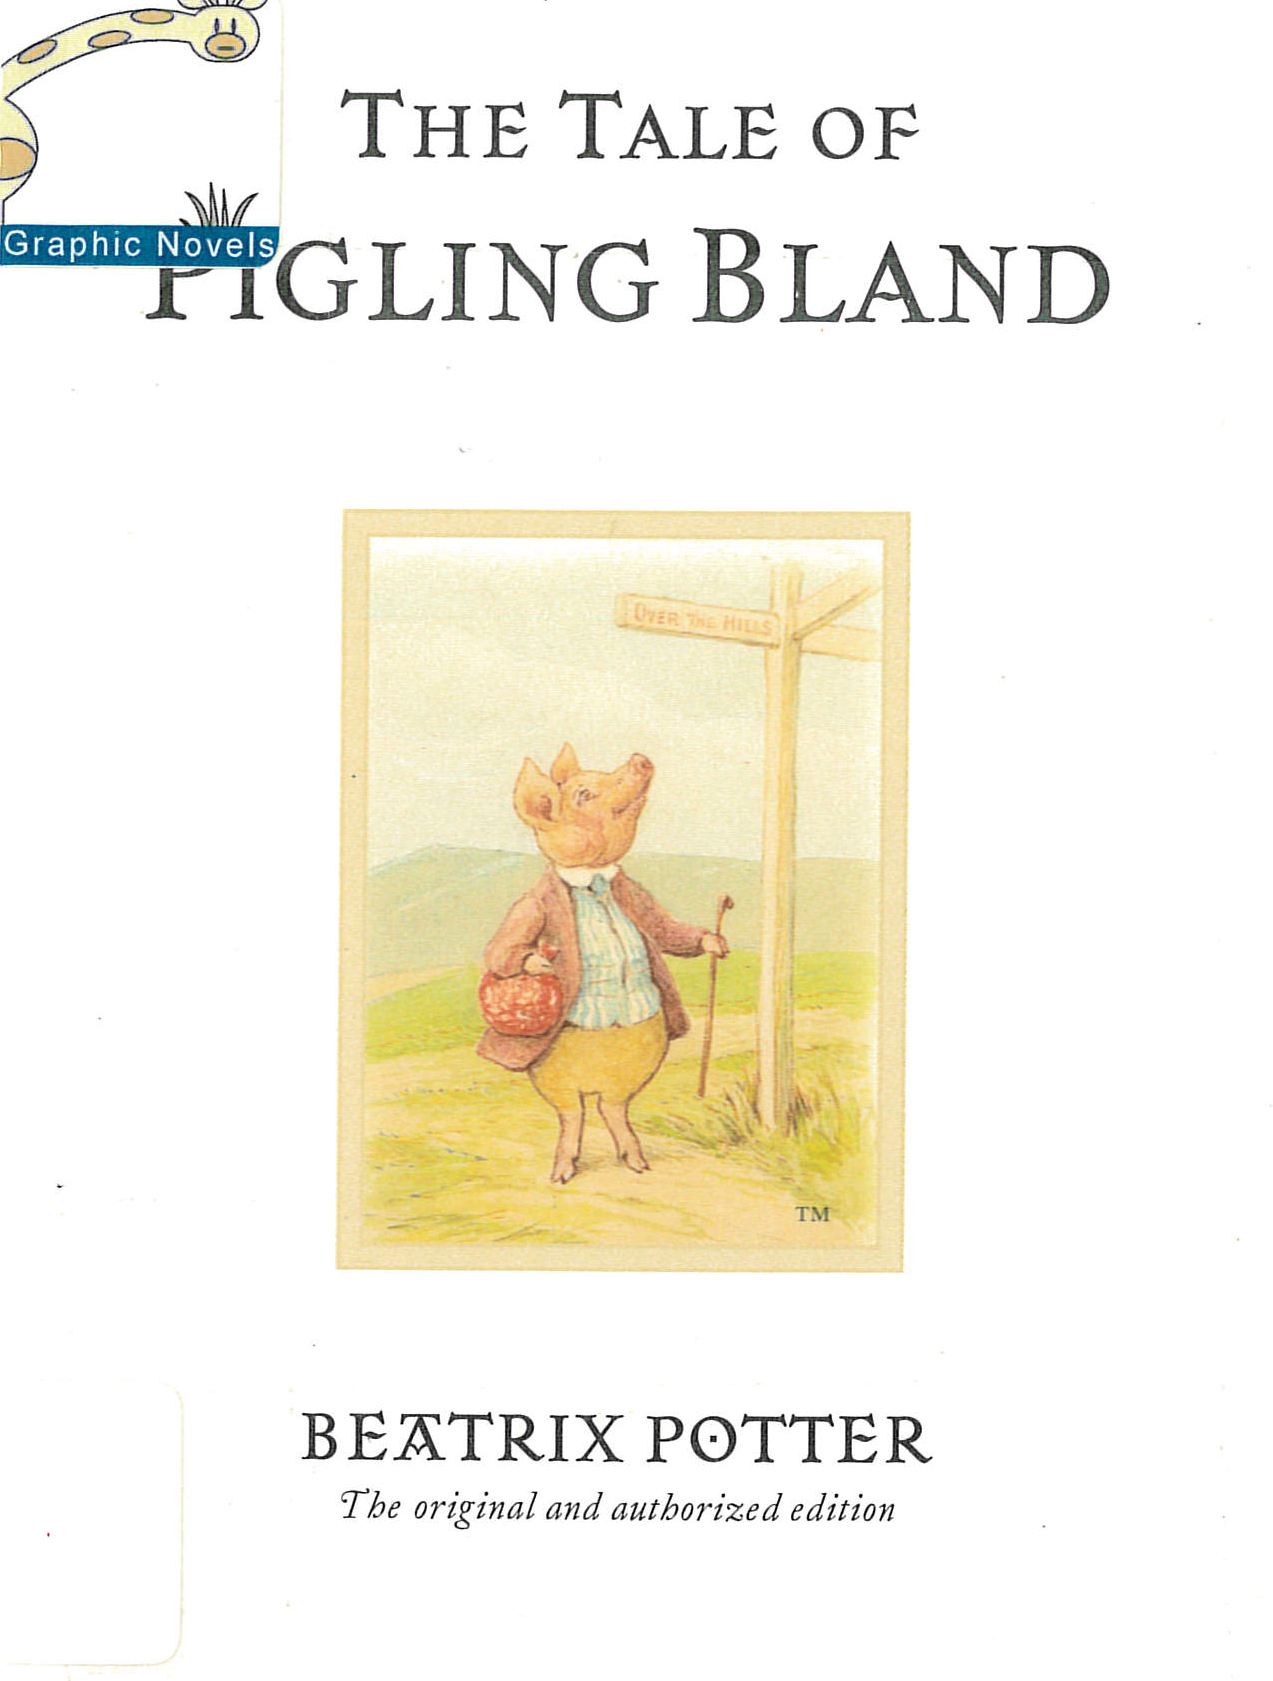 The tale of Pigling Bland